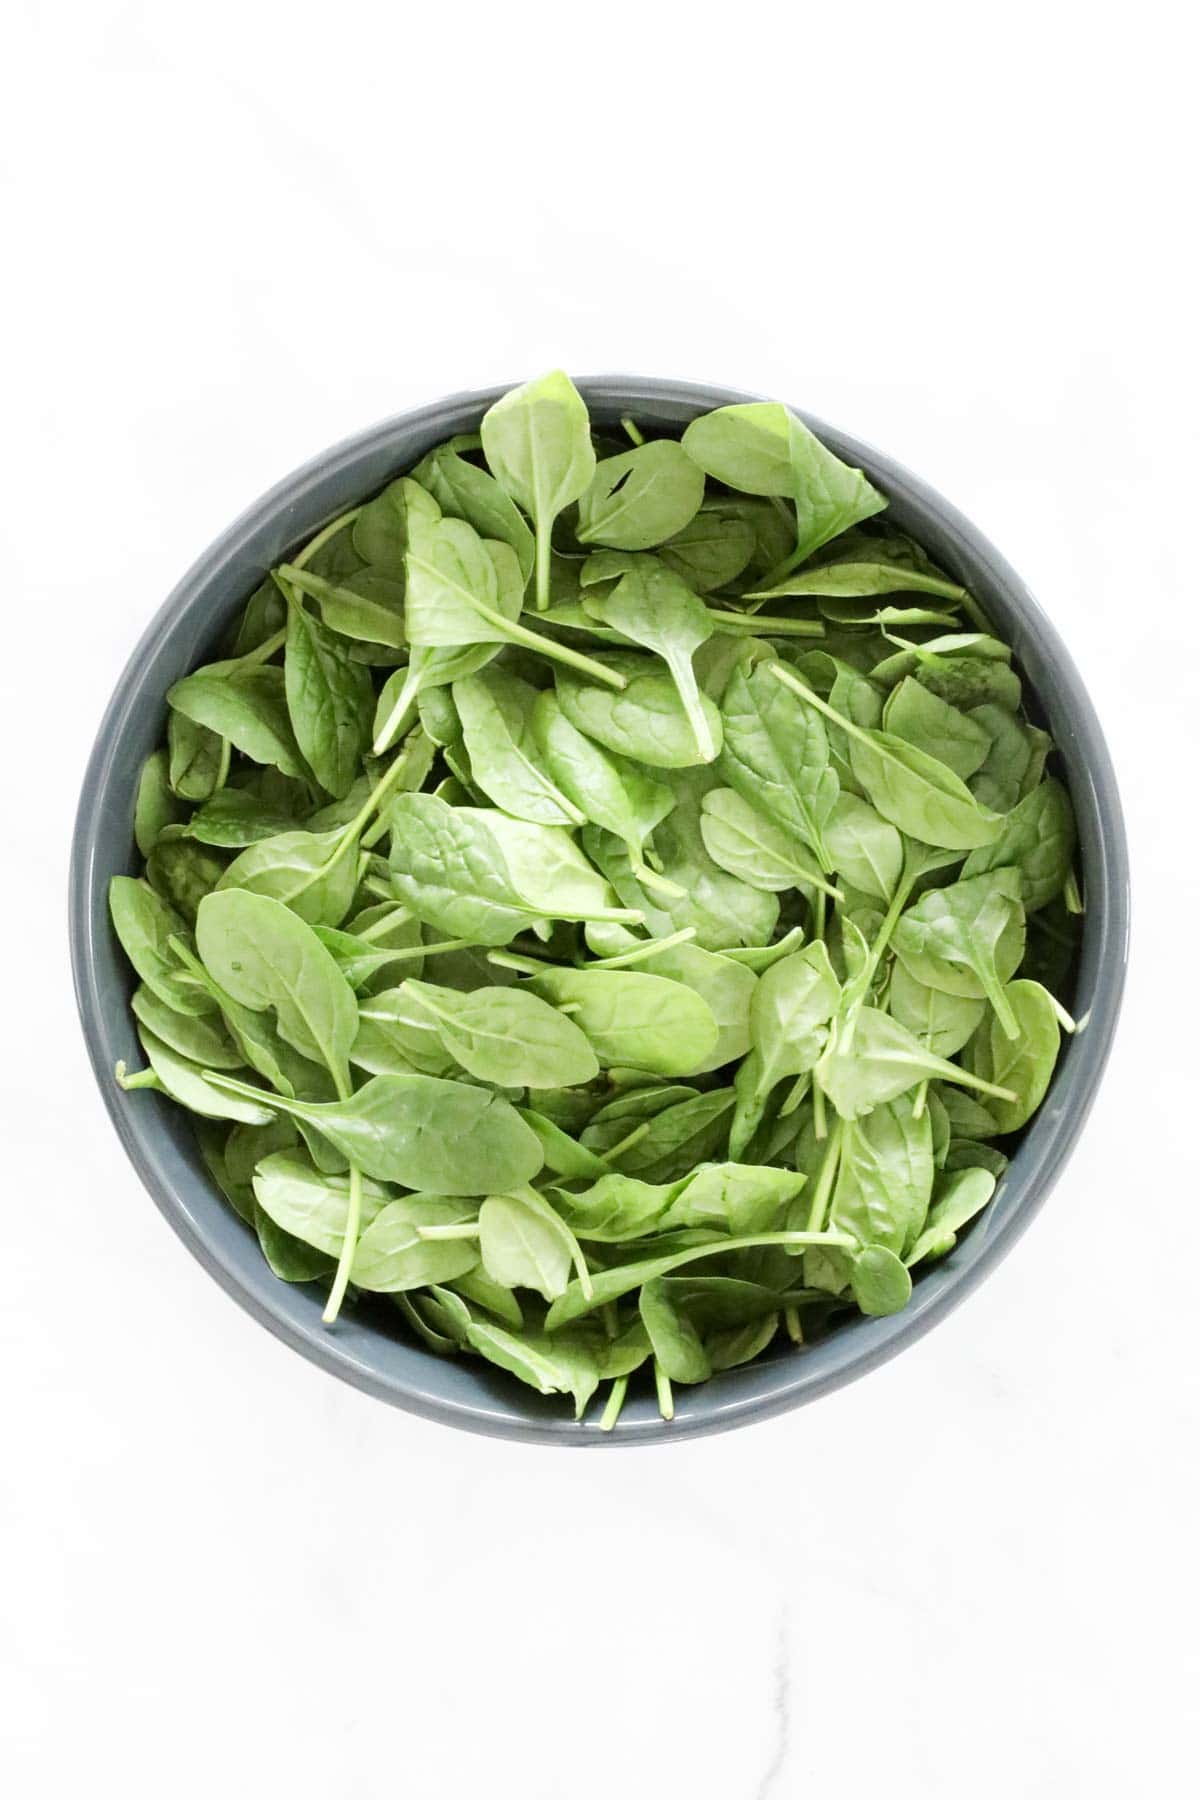 Baby spinach placed in a large serving bowl.